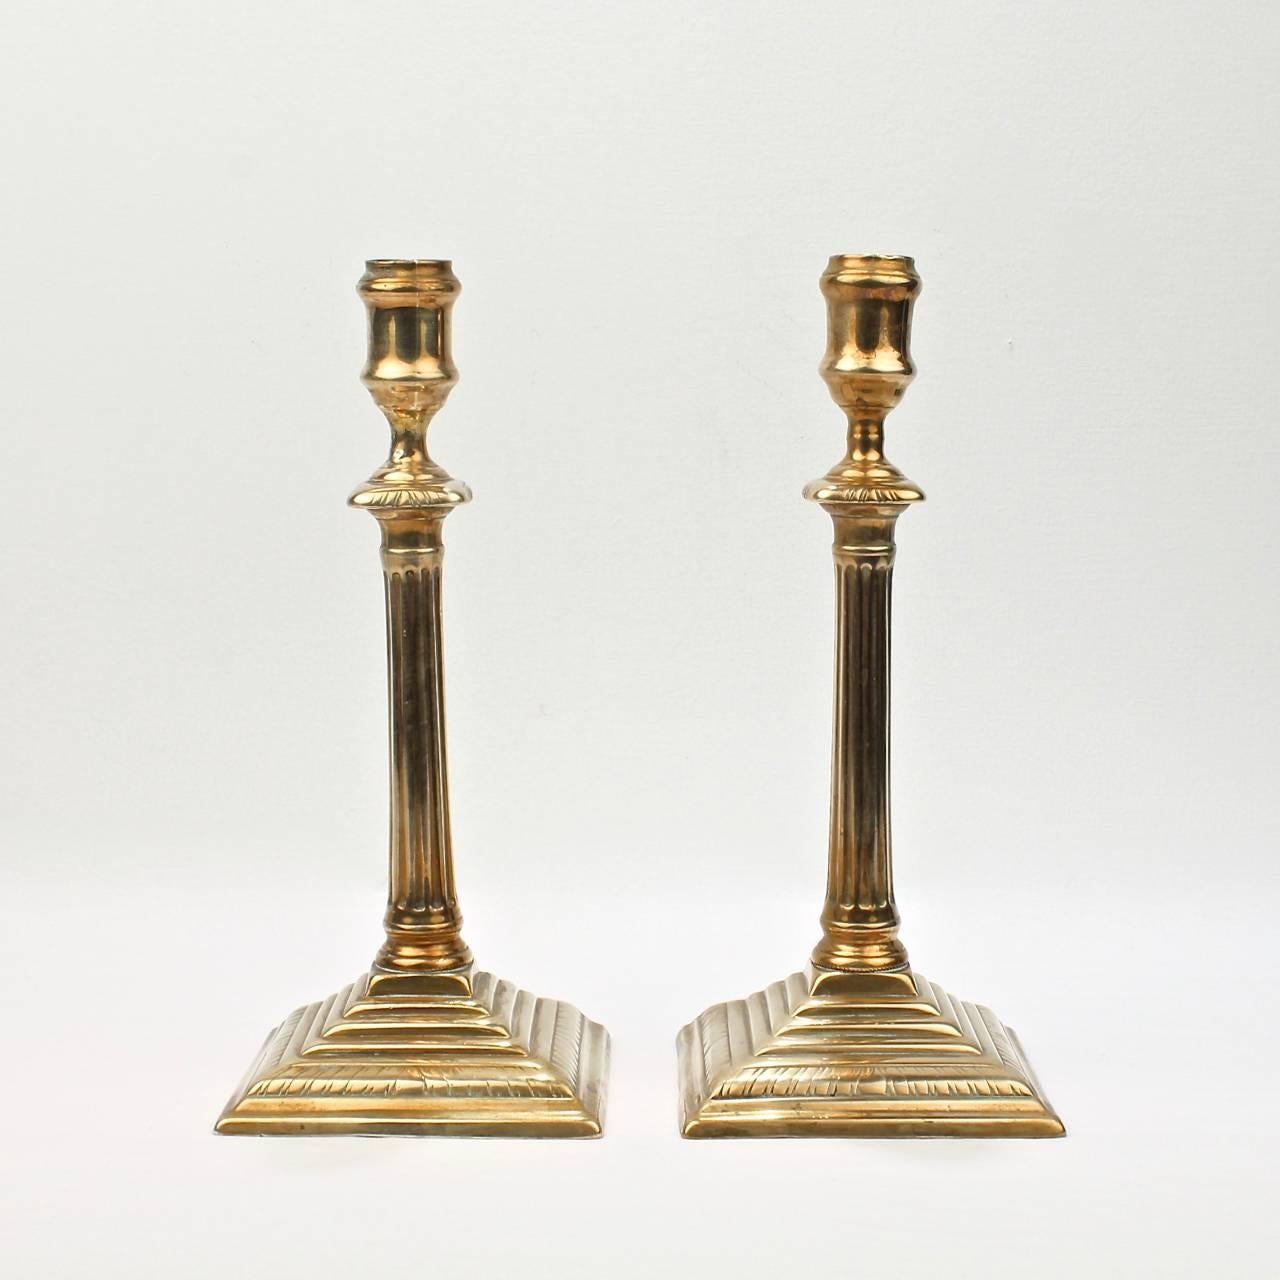 A fine pair of George III neoclassical brass candlesticks.

With gadrooned and stepped bases and columnar shafts supporting urn form candle cups.

With shafts peened through the bases and casting seams to sides.

Height: ca. 10 1/4